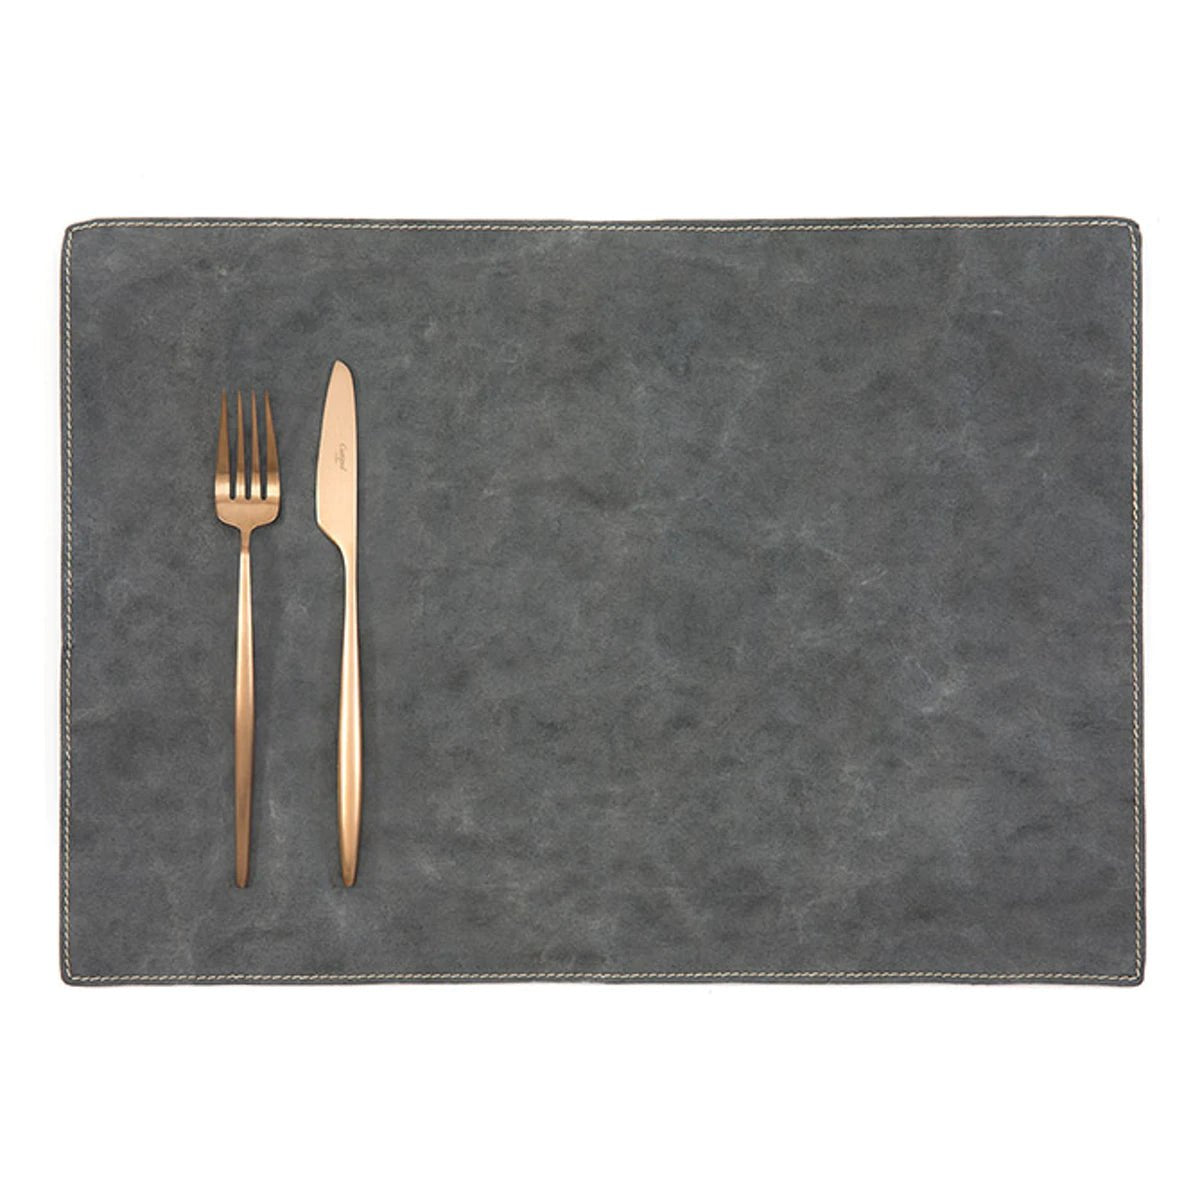 A rectangular washable paper placemat is shown with a rose gold fork and knife set on the left hand side. The placemat is dark grey.